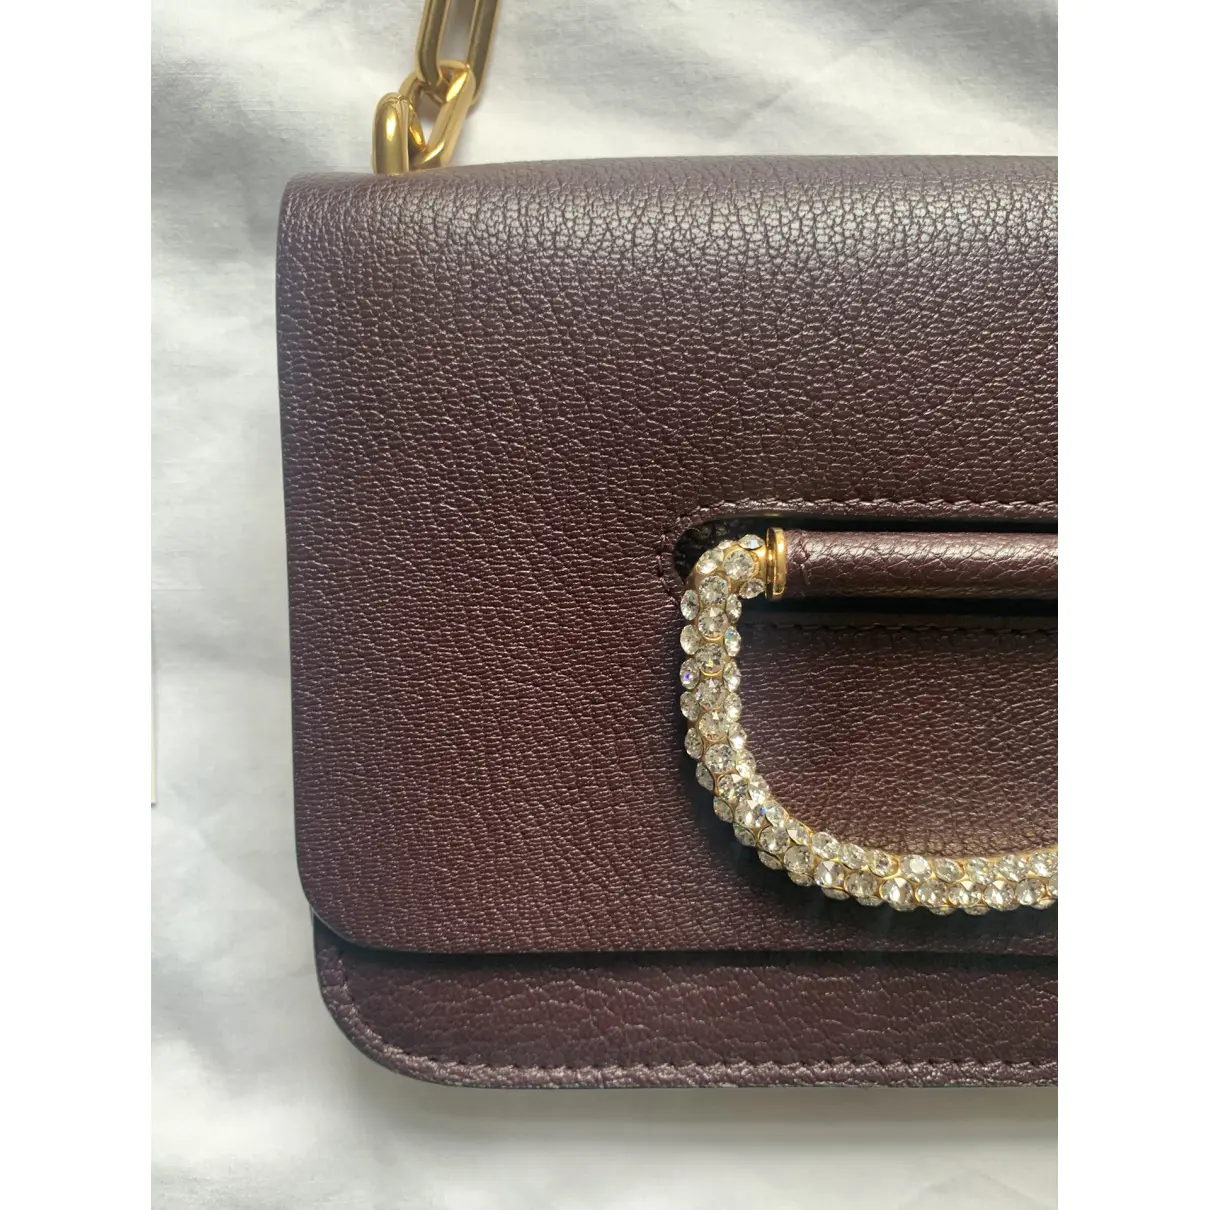 The D-ring leather mini bag Burberry